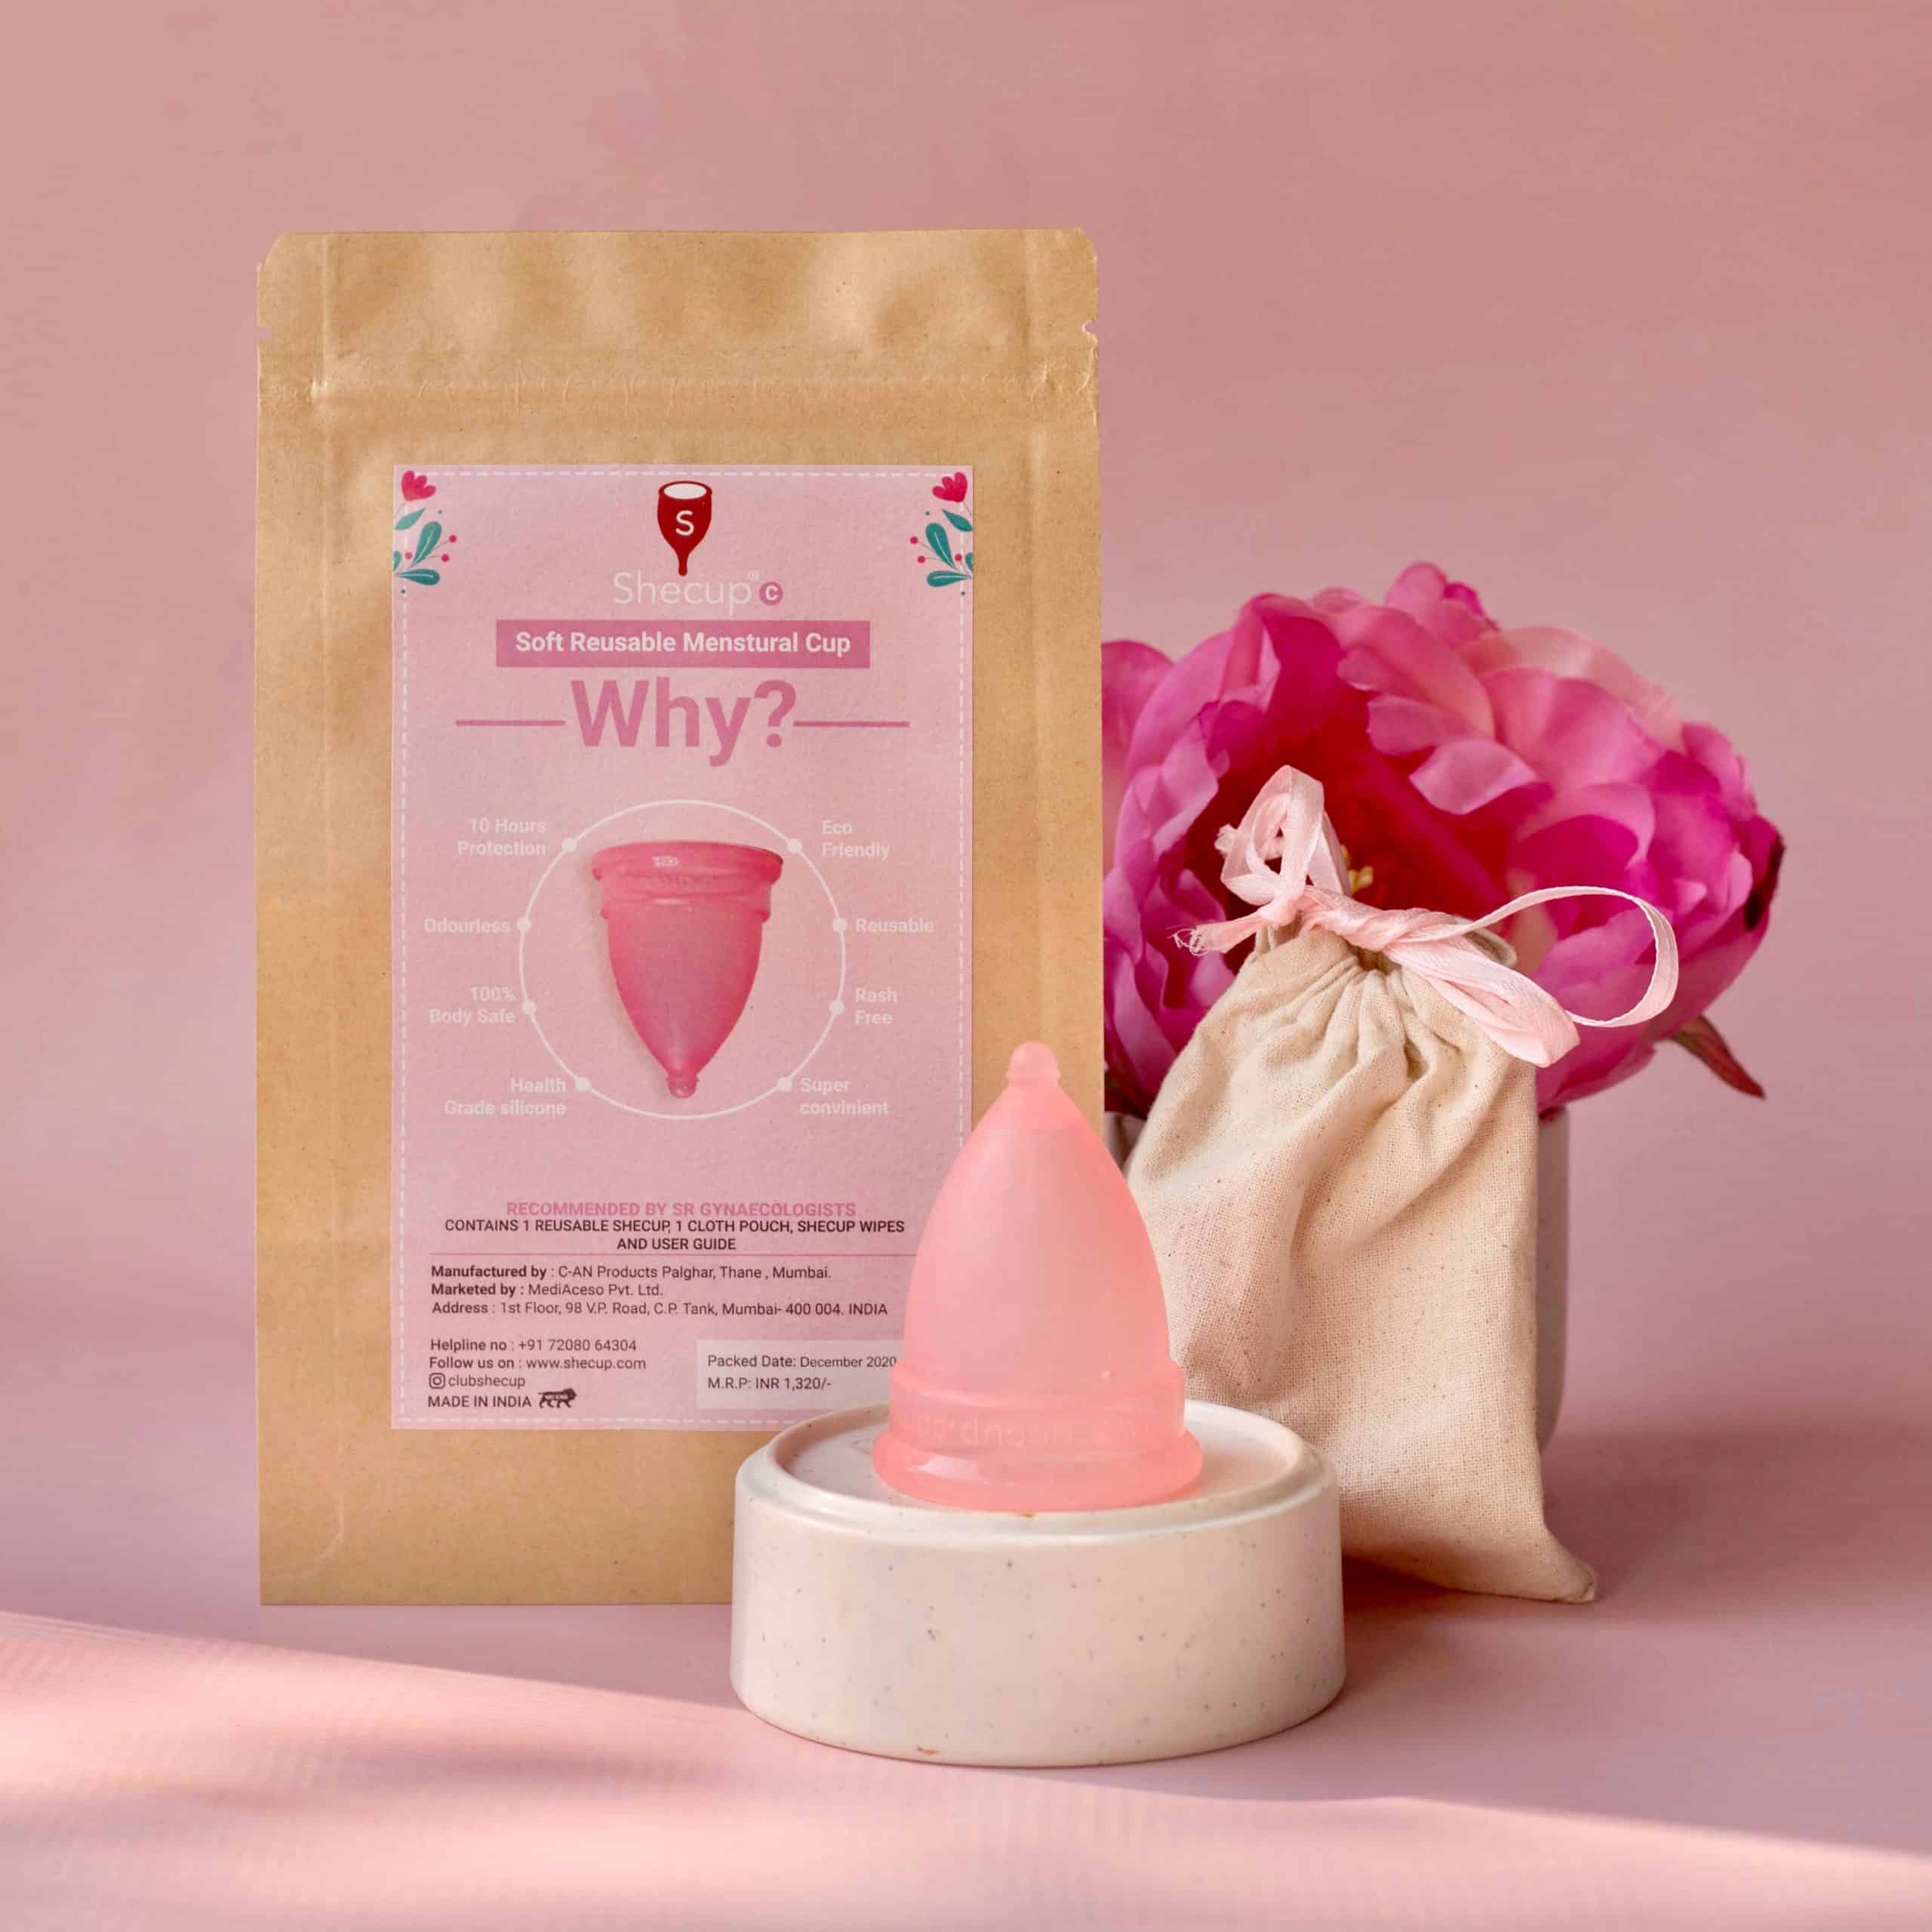 SHECUP International - Say Hello to India's First Menstrual Cup